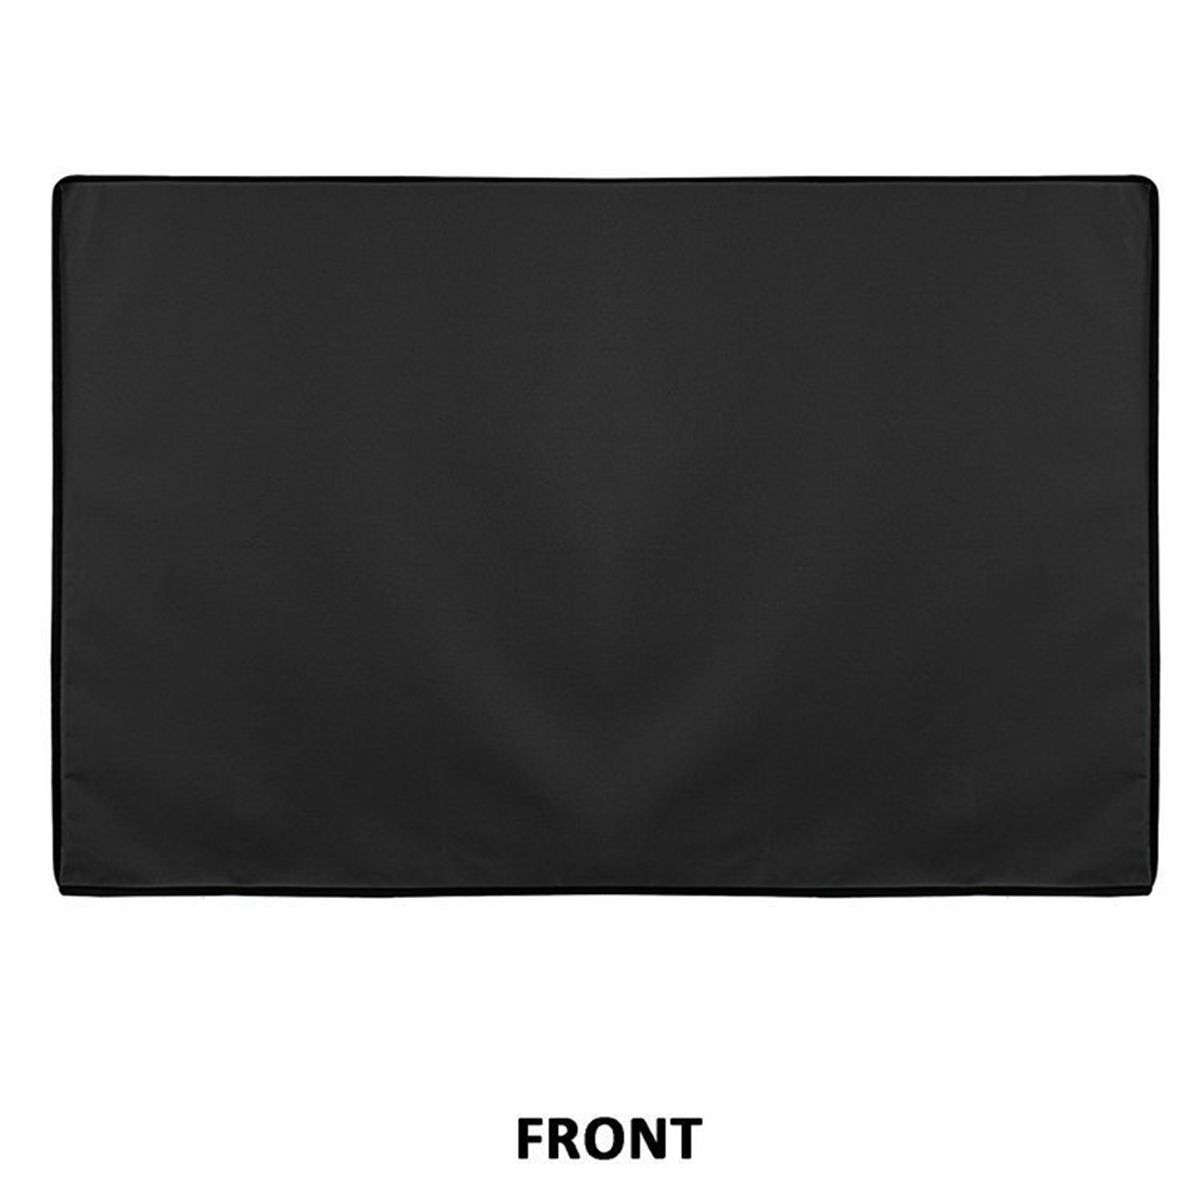 Black-600D-Outdoor-Fully-Dustproof-Weatherproof-TV-Cover-for-22-70-Inches-LED-LCD-Plasma-TVs-1673021